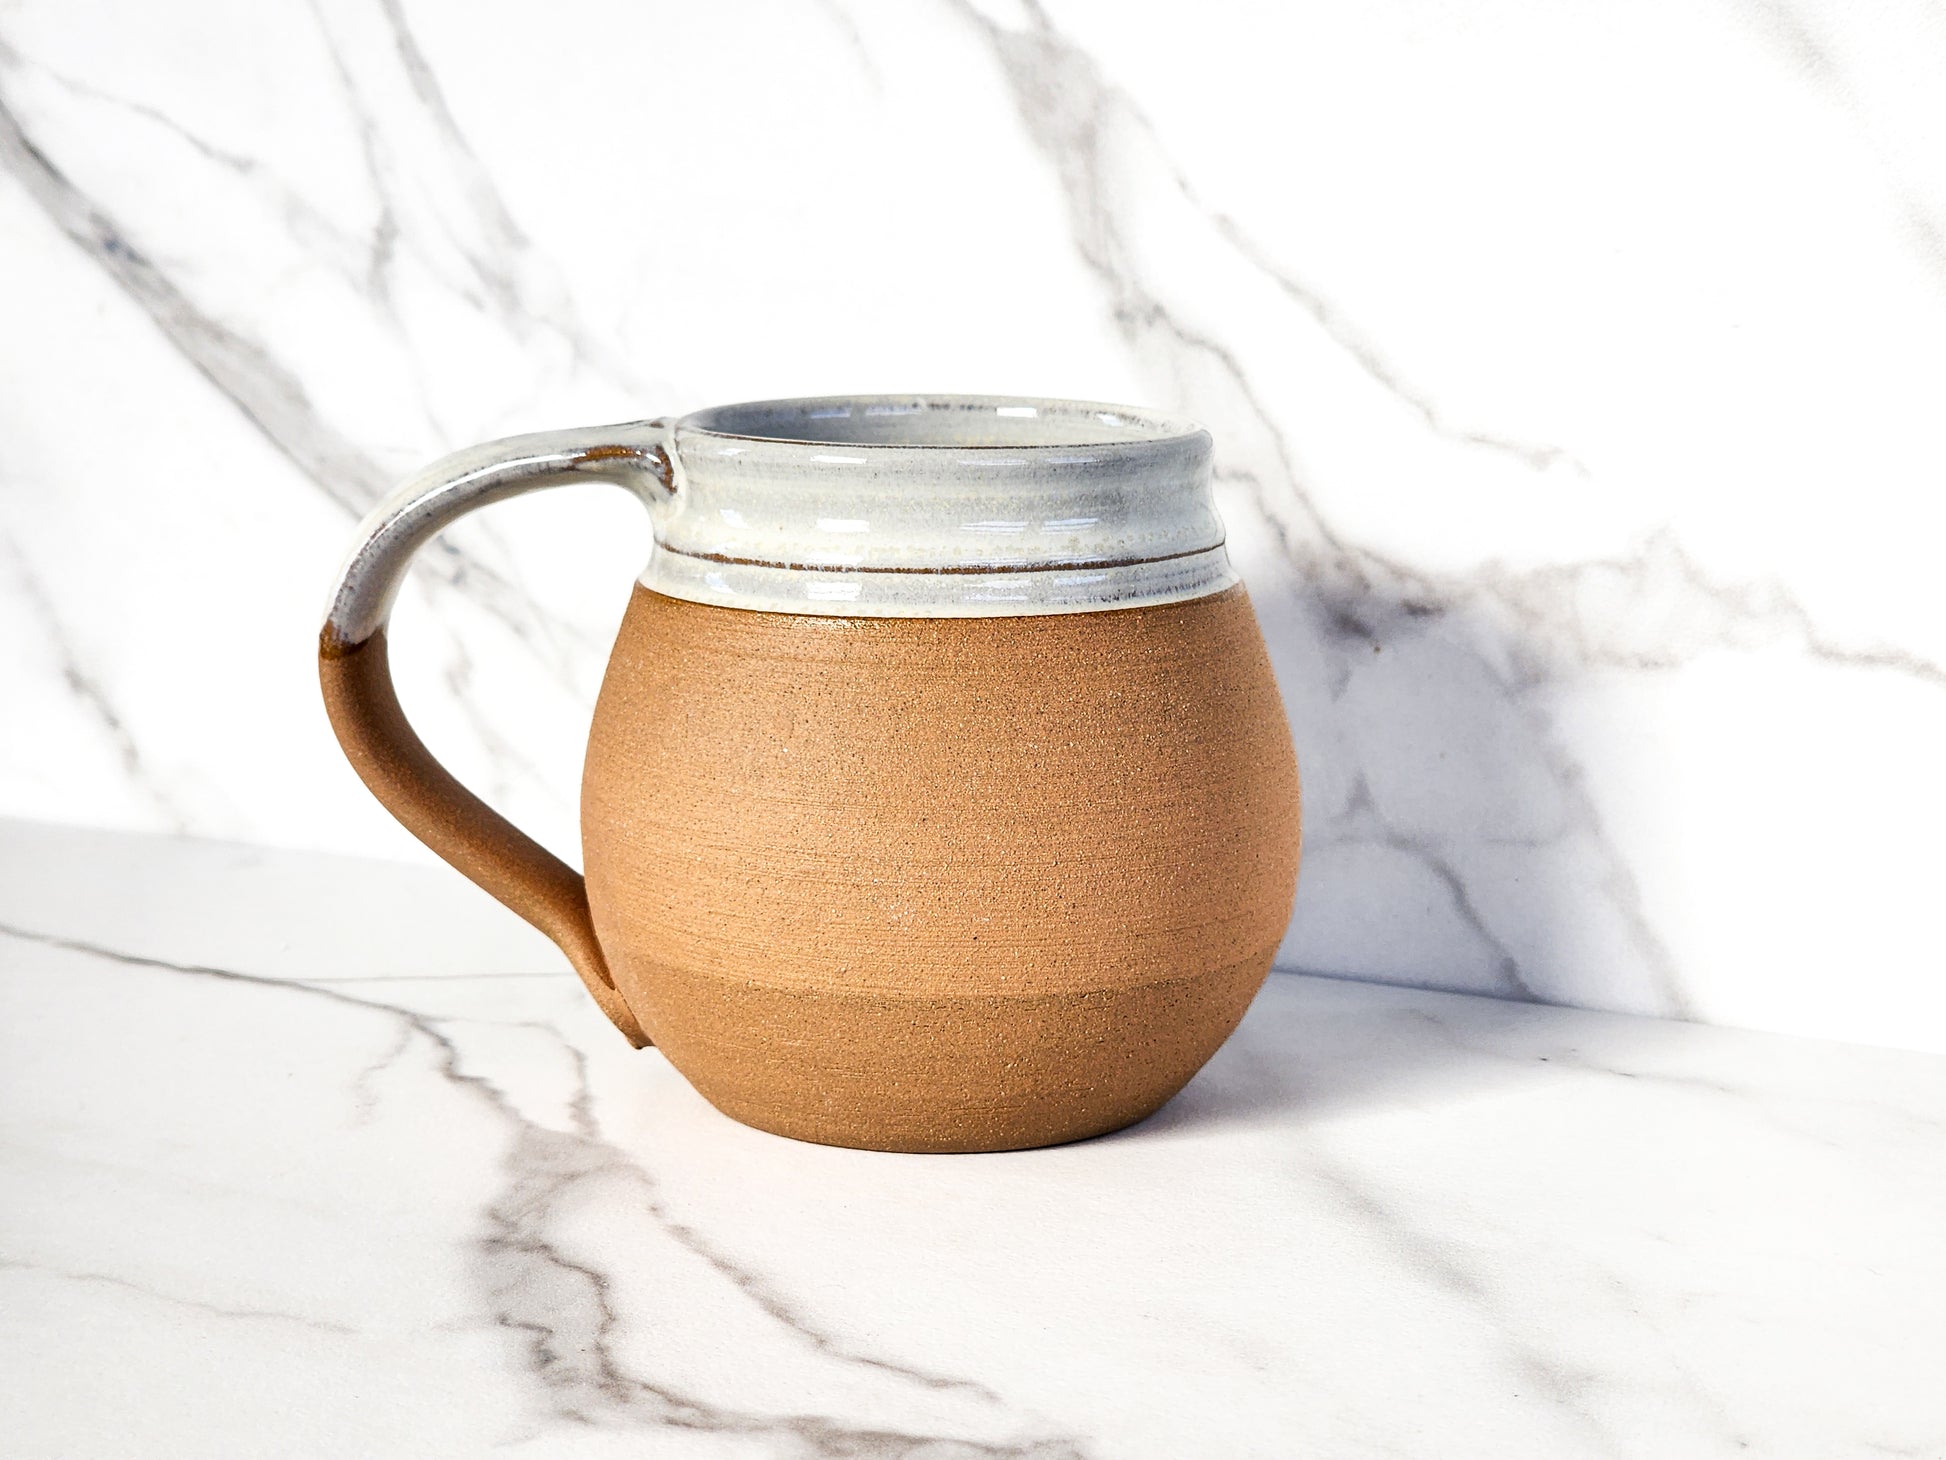 The image depicts a Natural medium mug by Clinton Pottery. Its earthy tone evokes a sense of warmth and tranquility, perfectly complementing the cozy ambiance of a morning coffee ritual.